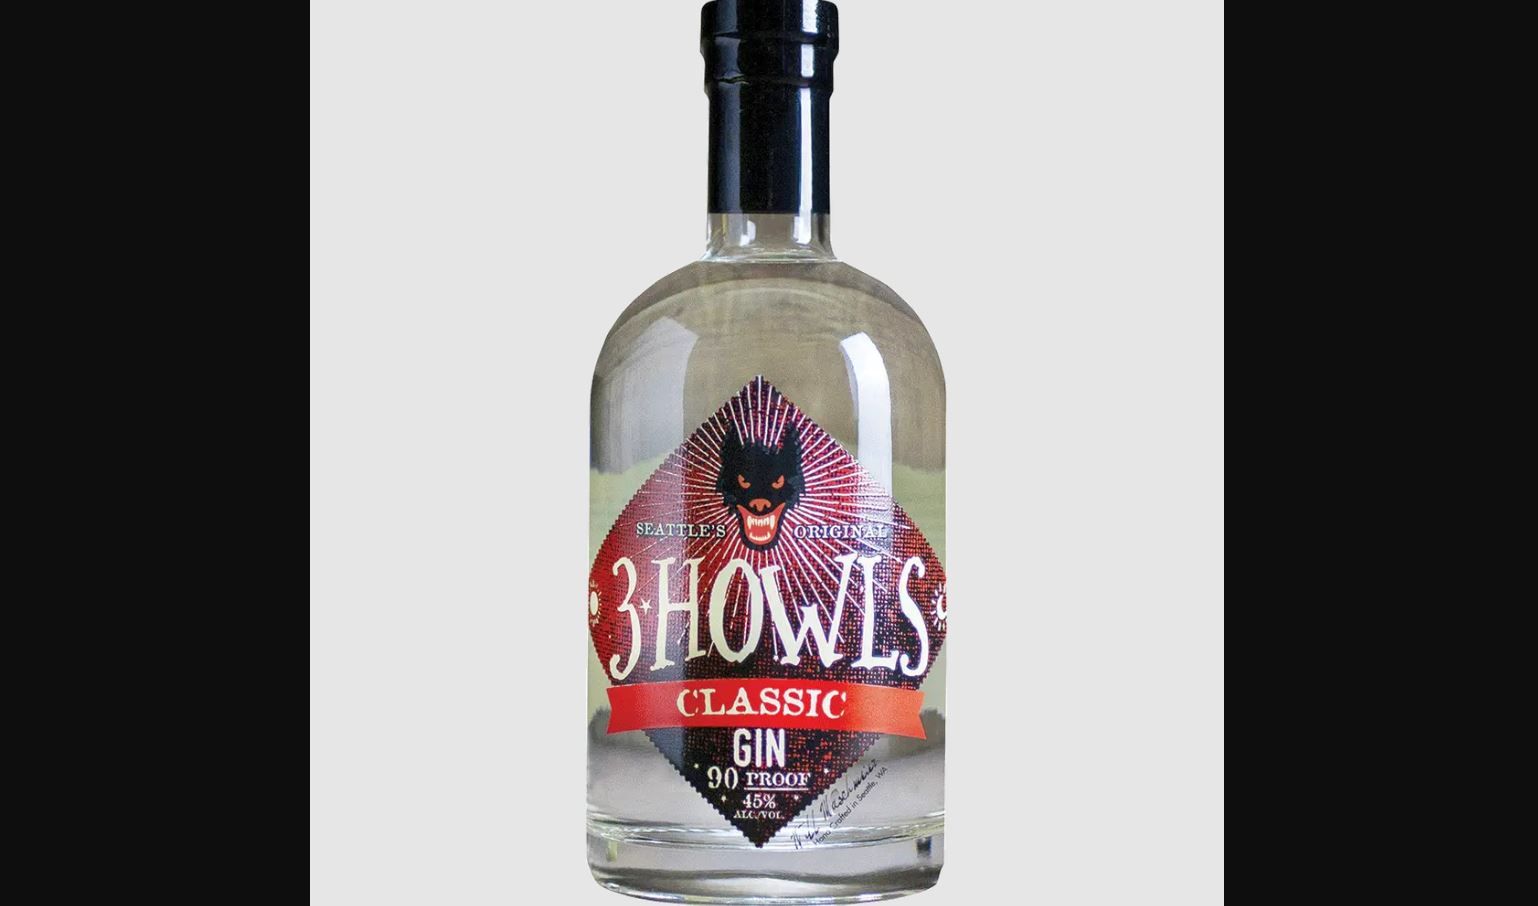 3 Howls Classic Gin